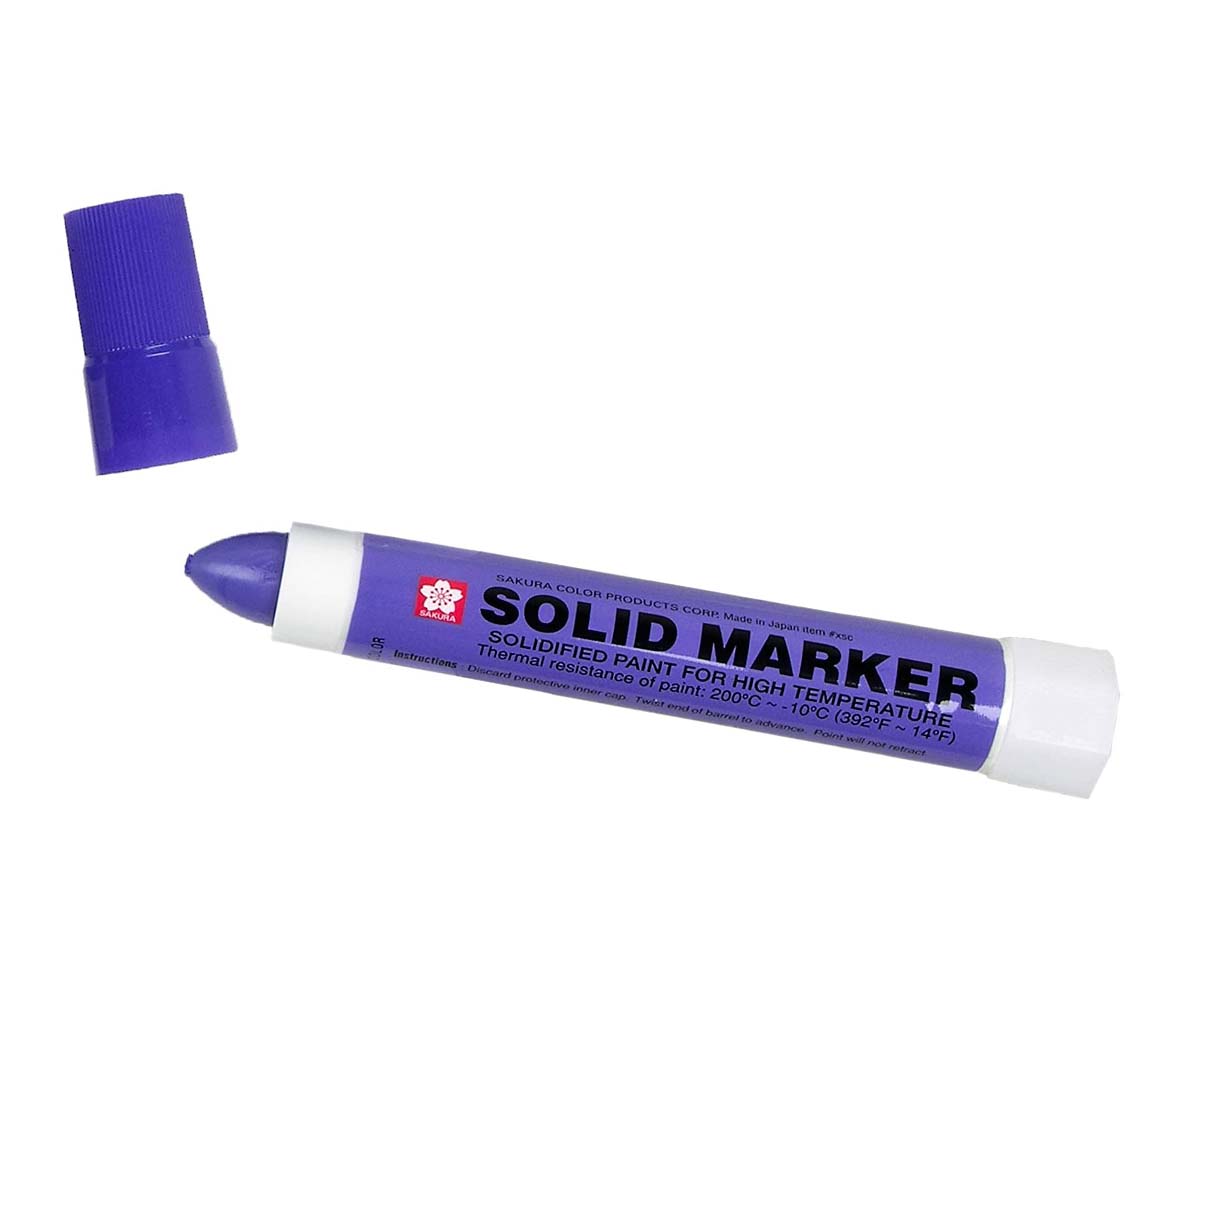 Brock Supply - SAKURA SOLID MARKER PURPLE - DOZEN FOR HIGH TEMPERATURES  (14F - 392F) - DRIES PERMANENT - WATERPROOF - FADE RESISTANT - MARKS ON  MOST SURFACES - NO MIXING NECESSARY - NON-FLAMMABLE